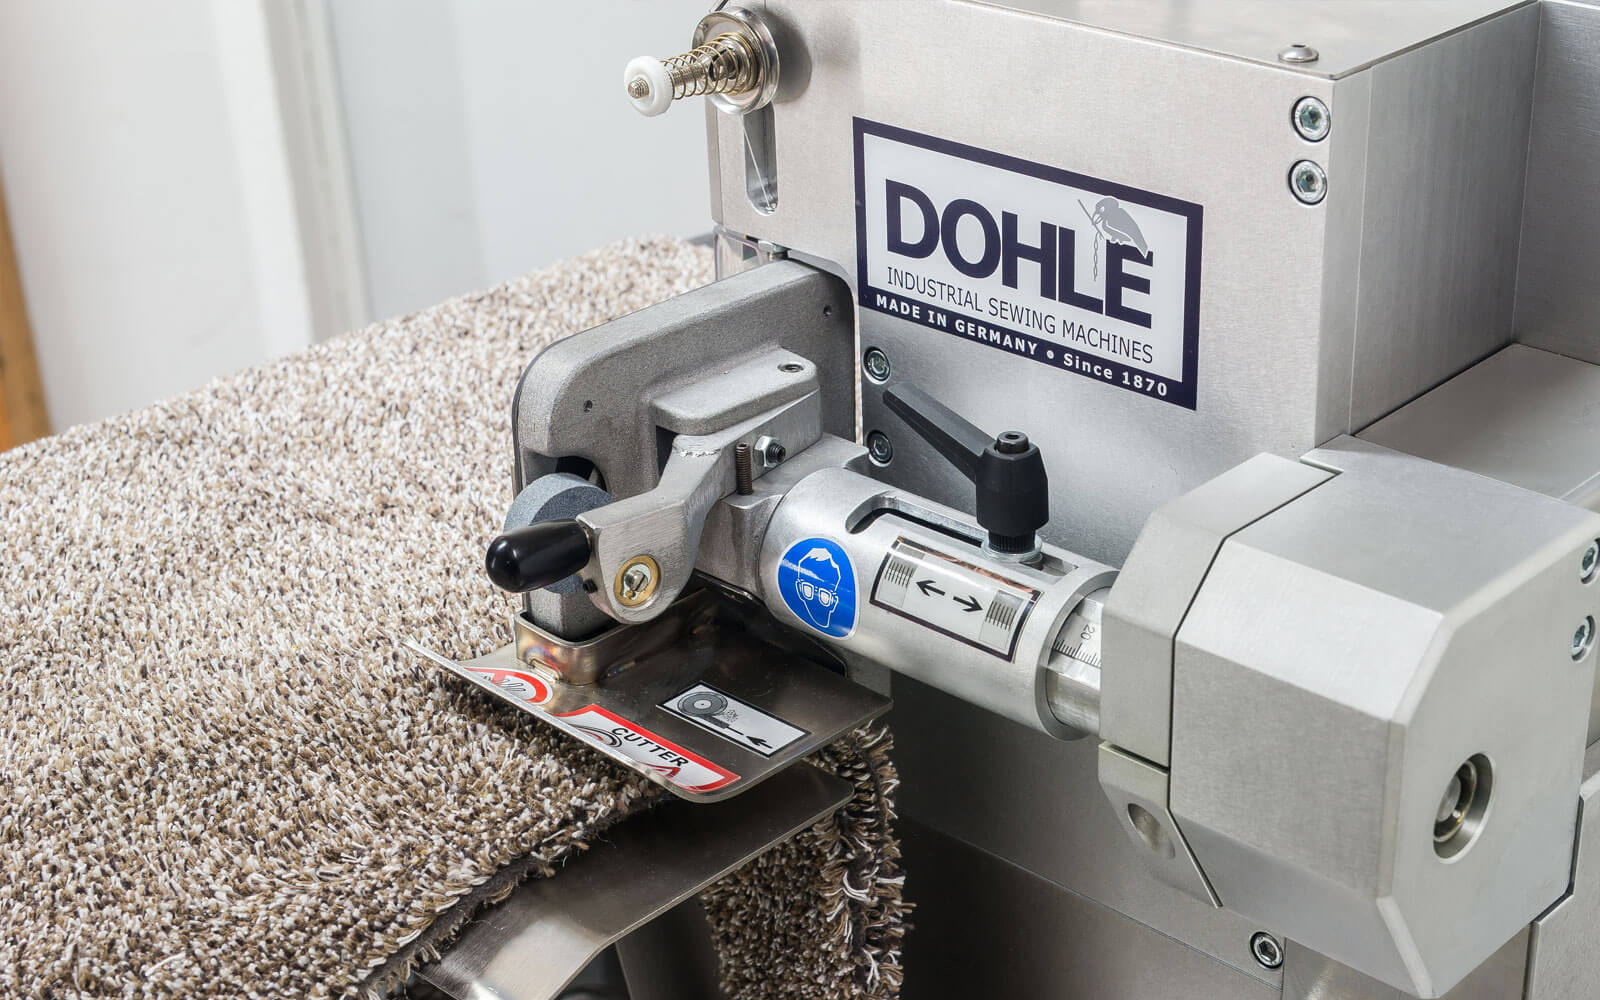 l28-l40 rail mounted sewing machine by Dohle